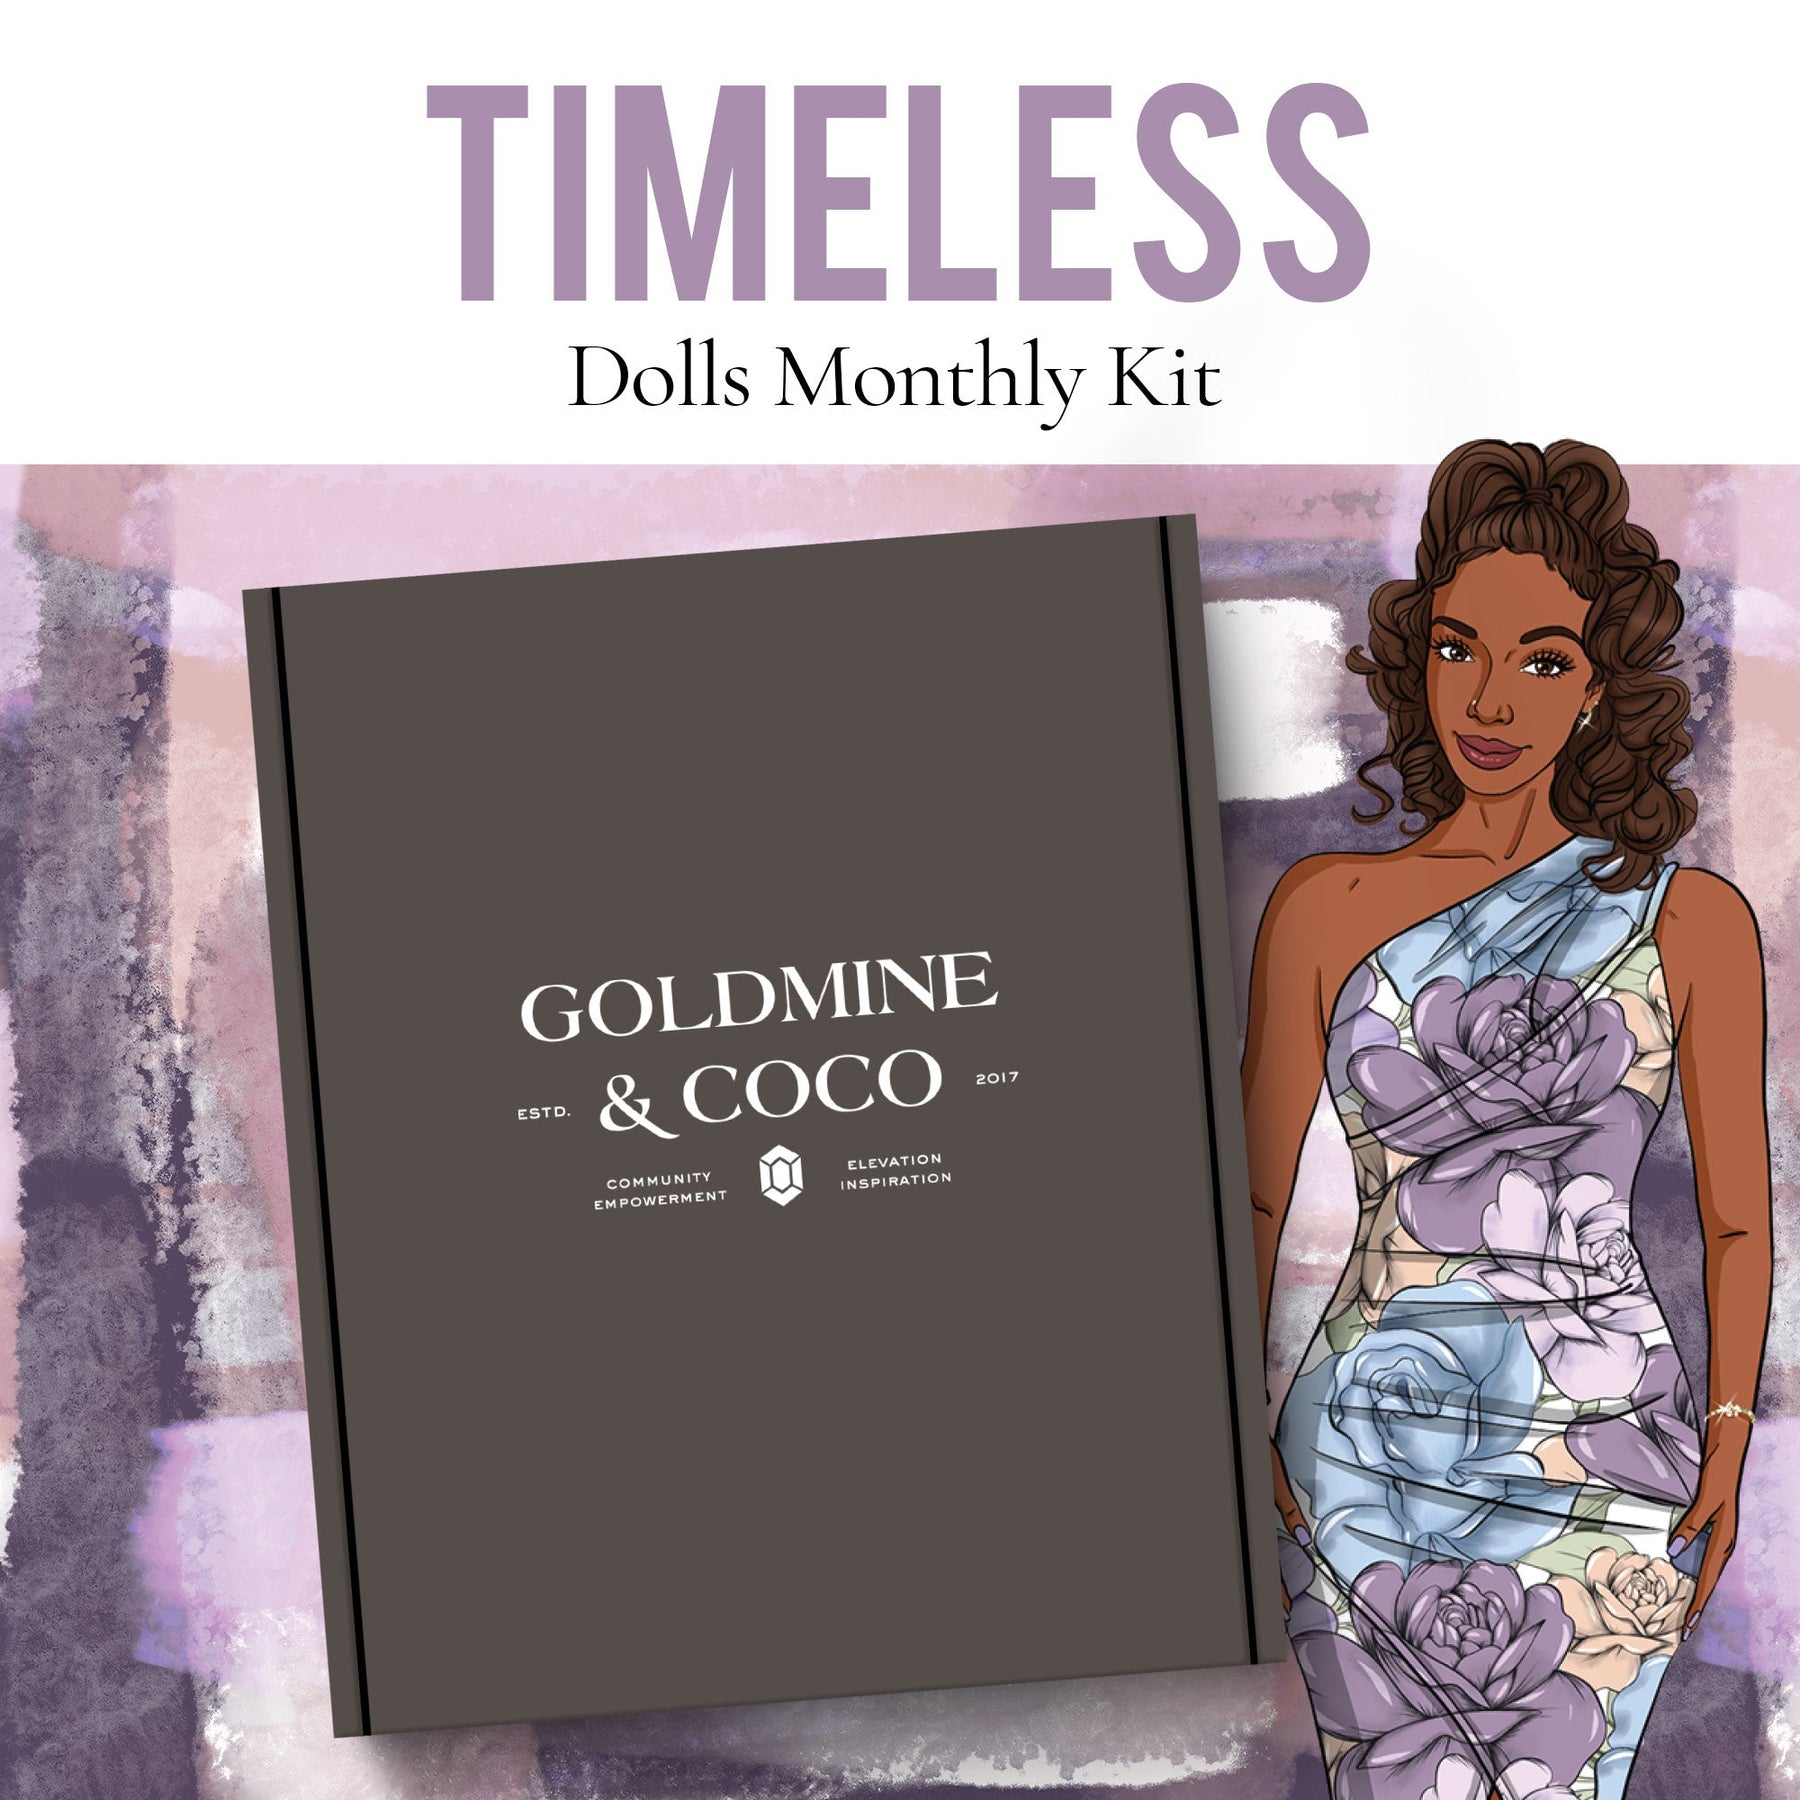 Goldmine & Coco Classic Journaling Kit: Limited Edition Preview Box